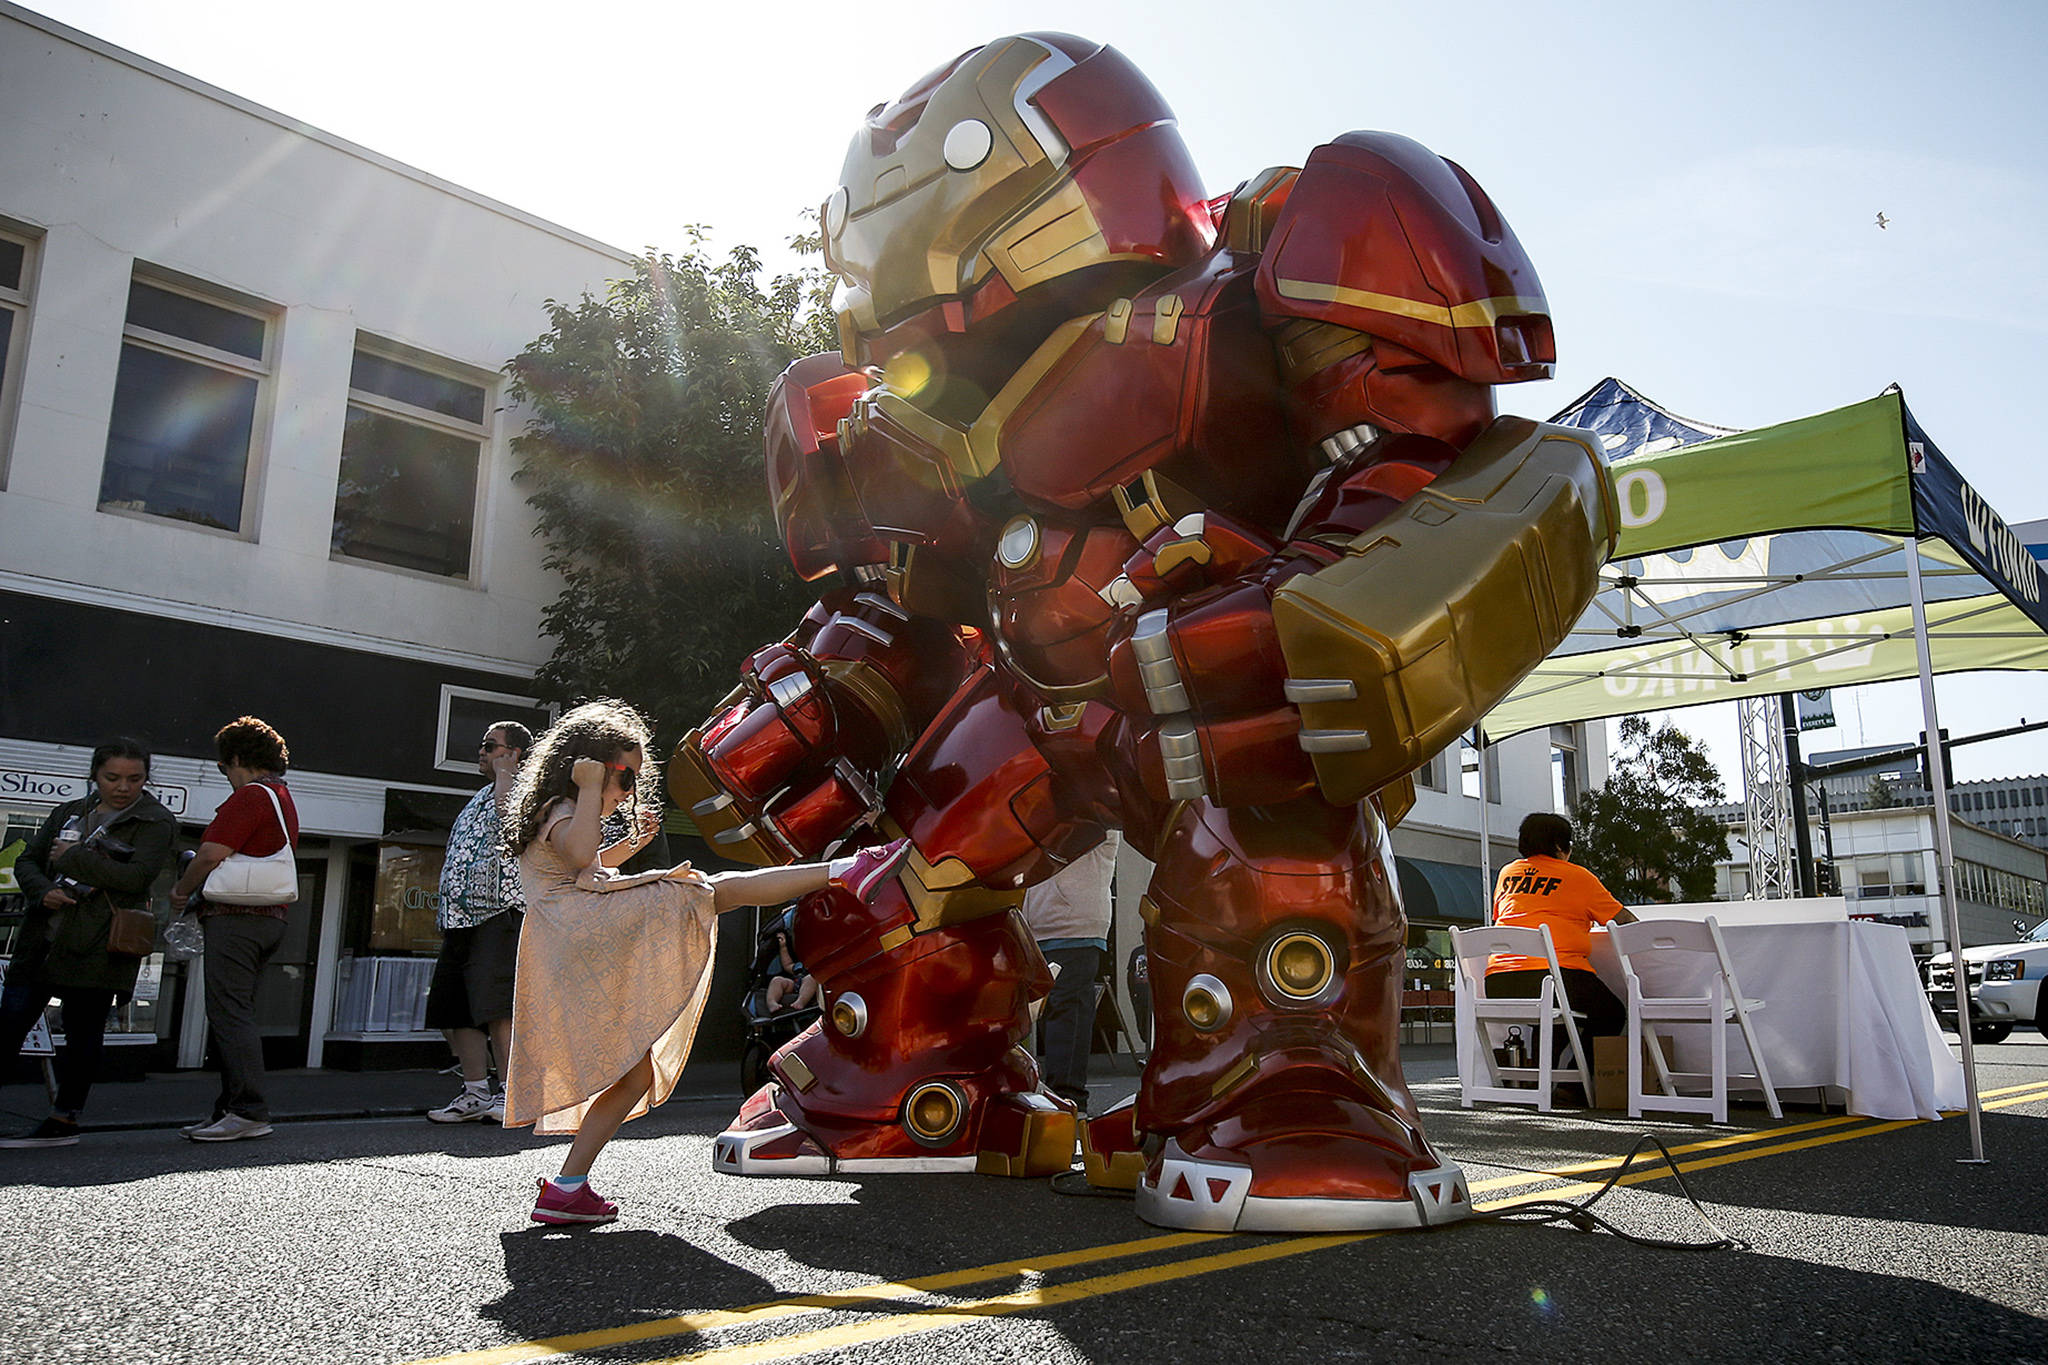 Mikaelin Hann of Everett, gives a gigantic Ironman toy a playful kick during the grand opening of Funko in downtown Everett on Saturday, Aug. 19, 2017. The company plans a block party Saturday to celebrate its first anniversary, as well as Everett’s 125th birthday. (Ian Terry / The Herald)